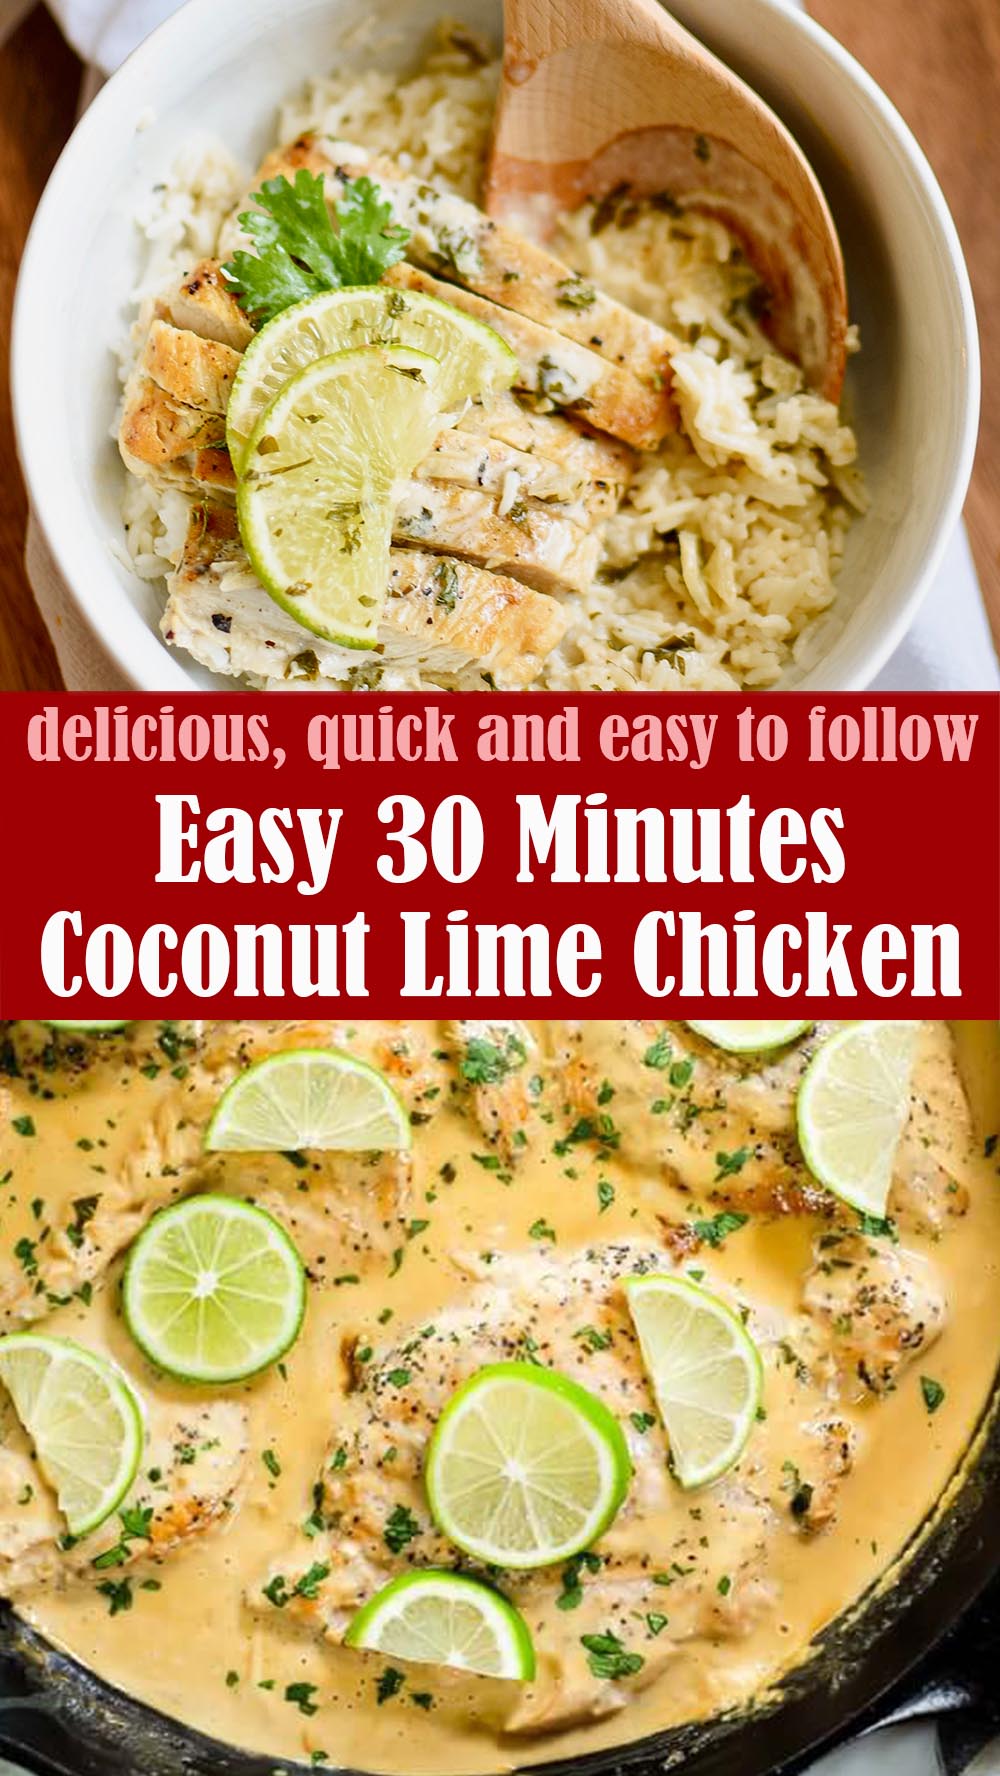 Easy 30 Minutes Coconut Lime Chicken